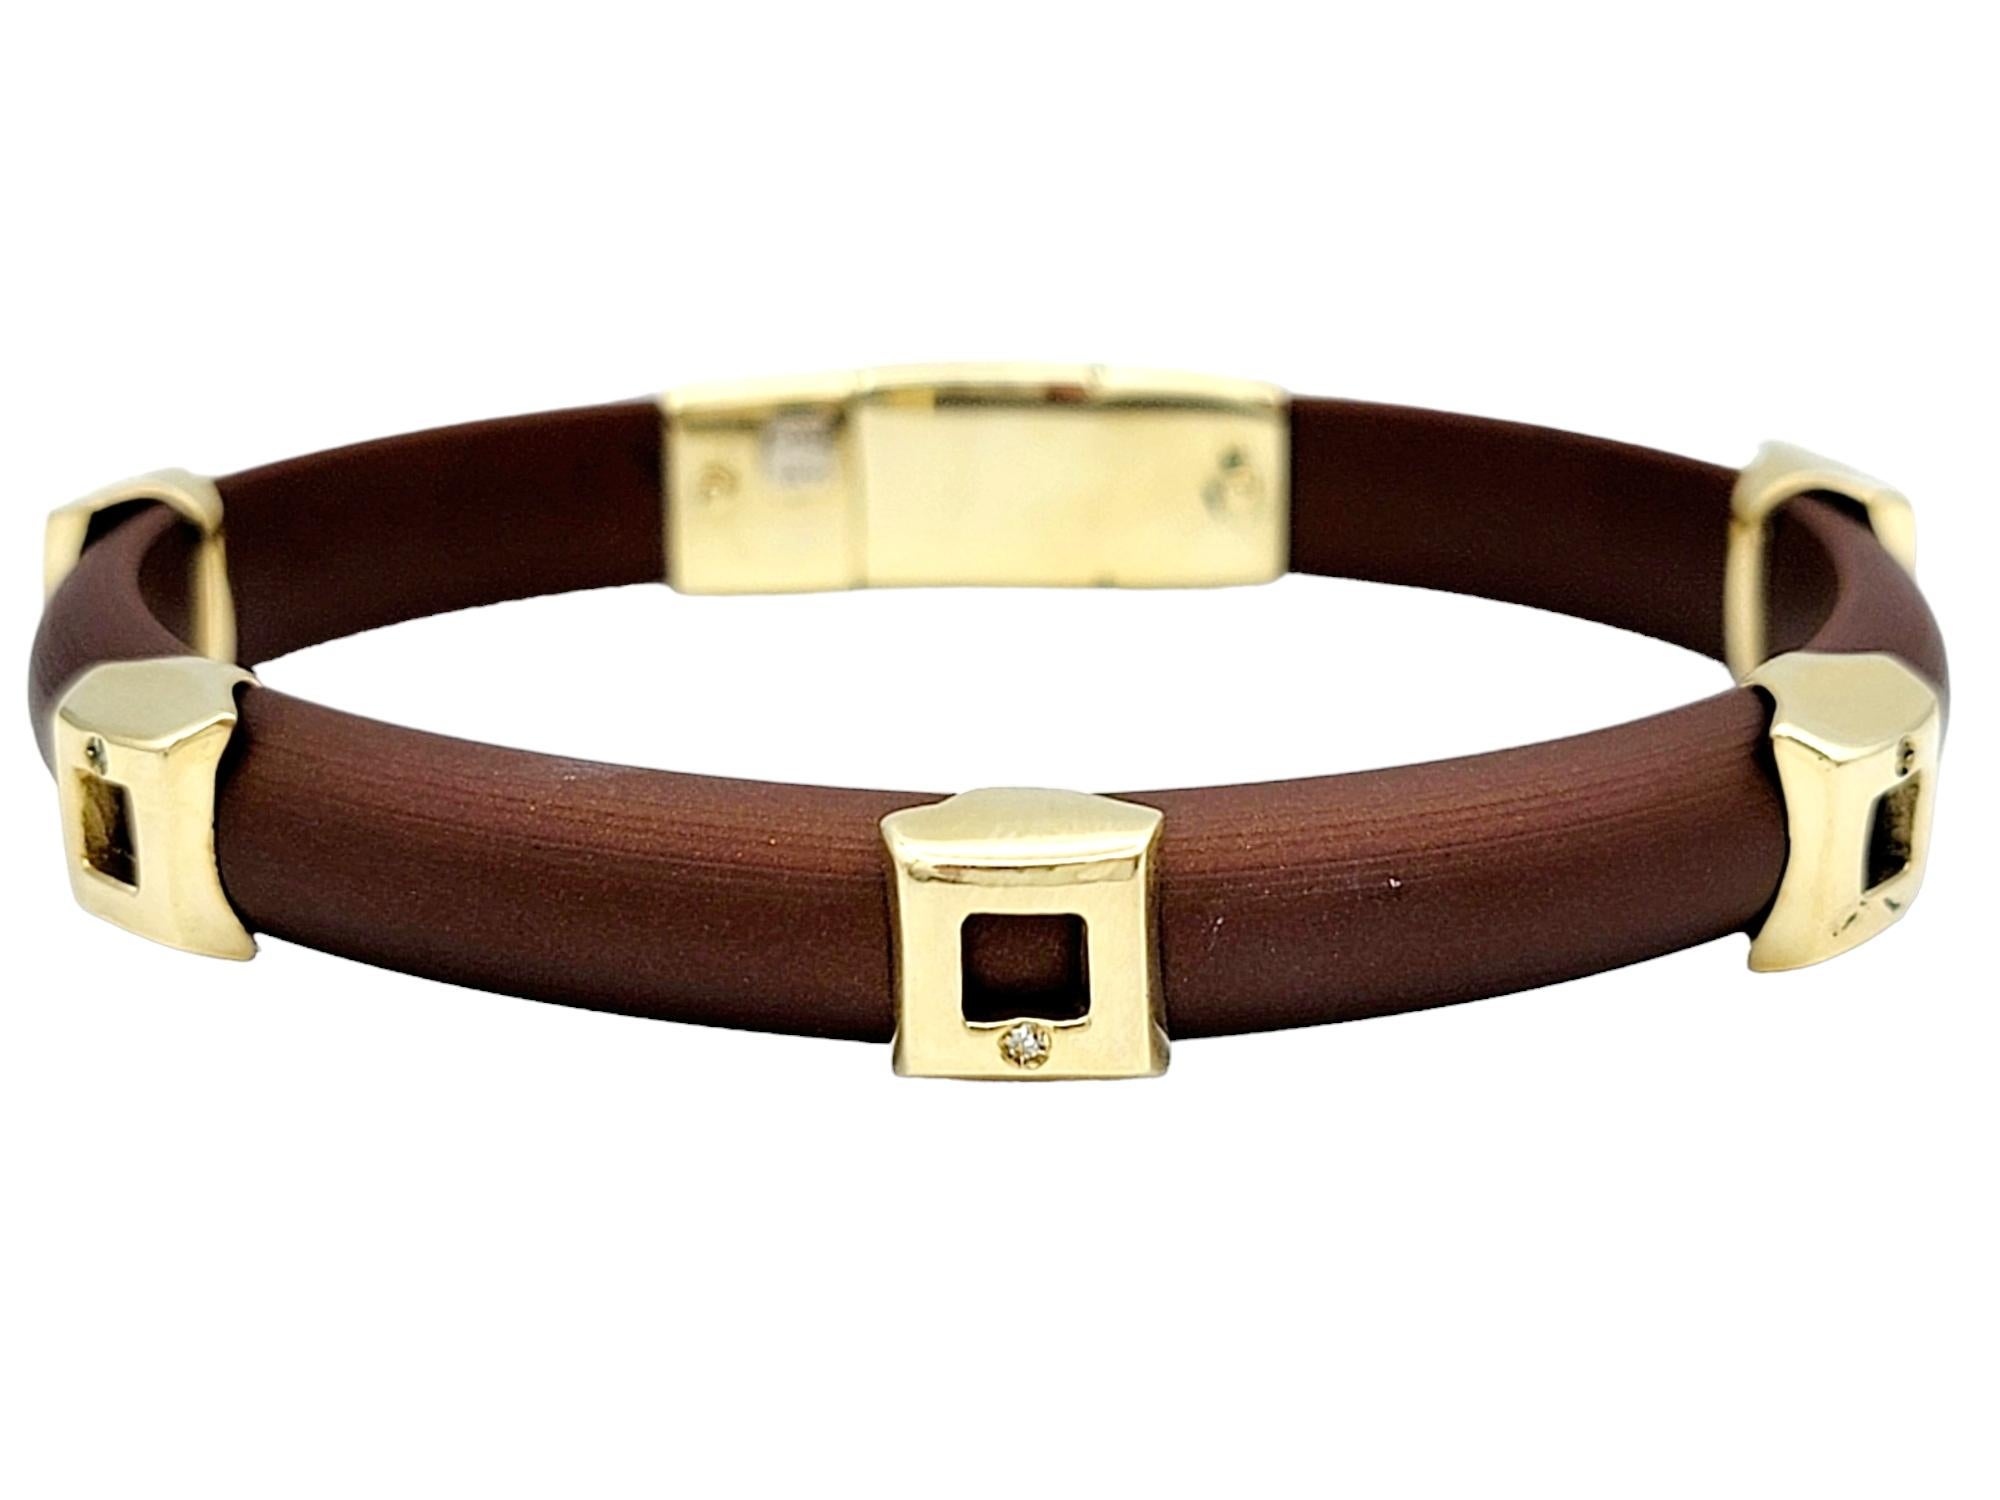 This stunning bracelet marries the warmth of 14 karat yellow gold with the contemporary appeal of sleek brown rubber, resulting in a striking and versatile accessory. The bracelet's unique charm lies in its meticulously crafted gold stations, spaced